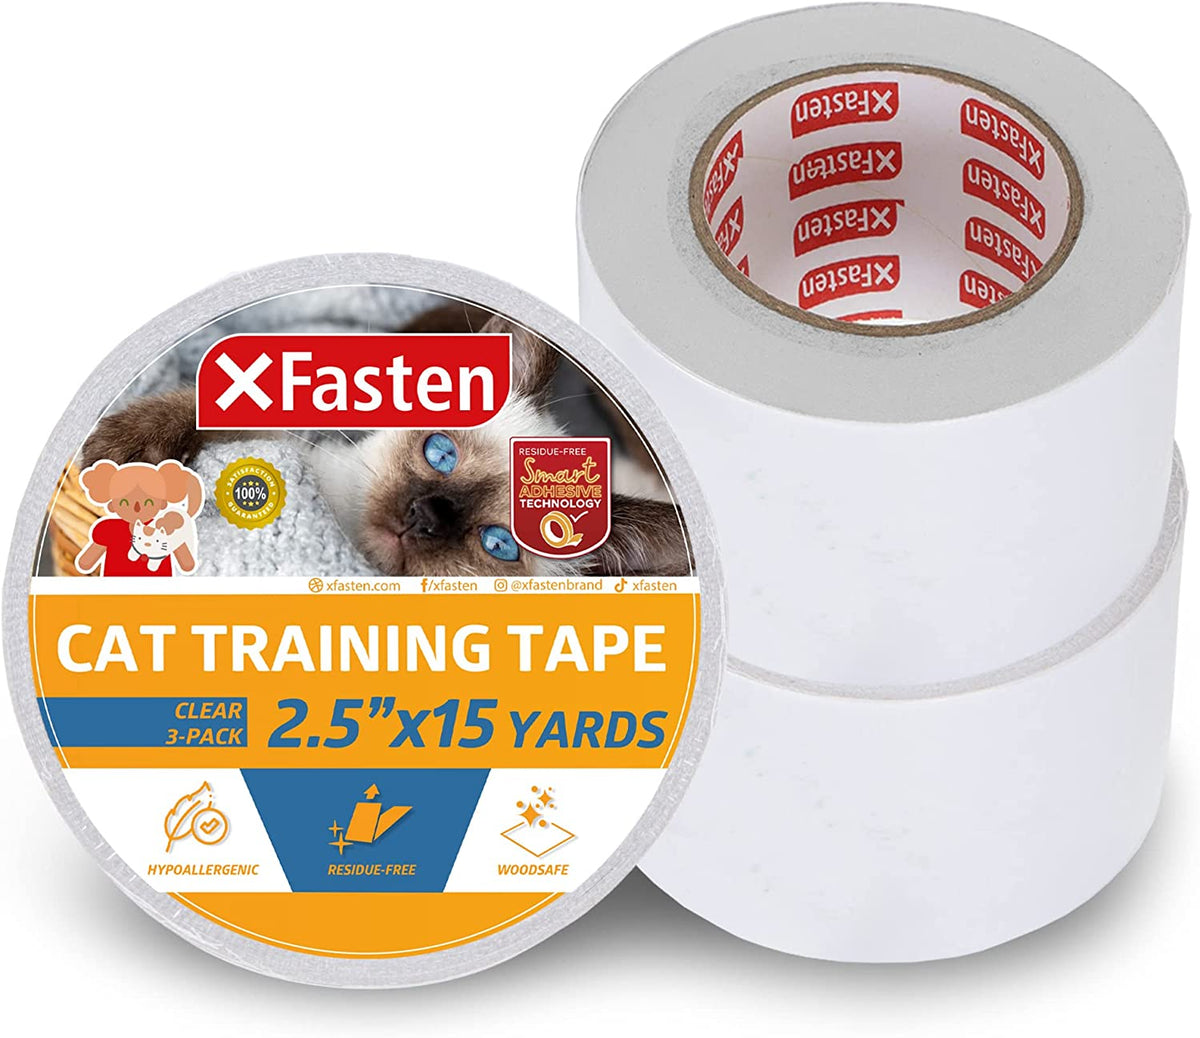 Cat Scratch Deterrent Tape,Anti Scratching Protection Tape,Furniture  Protectors from Cats,Clear Double Sided Training Tape, TheBest Choice to